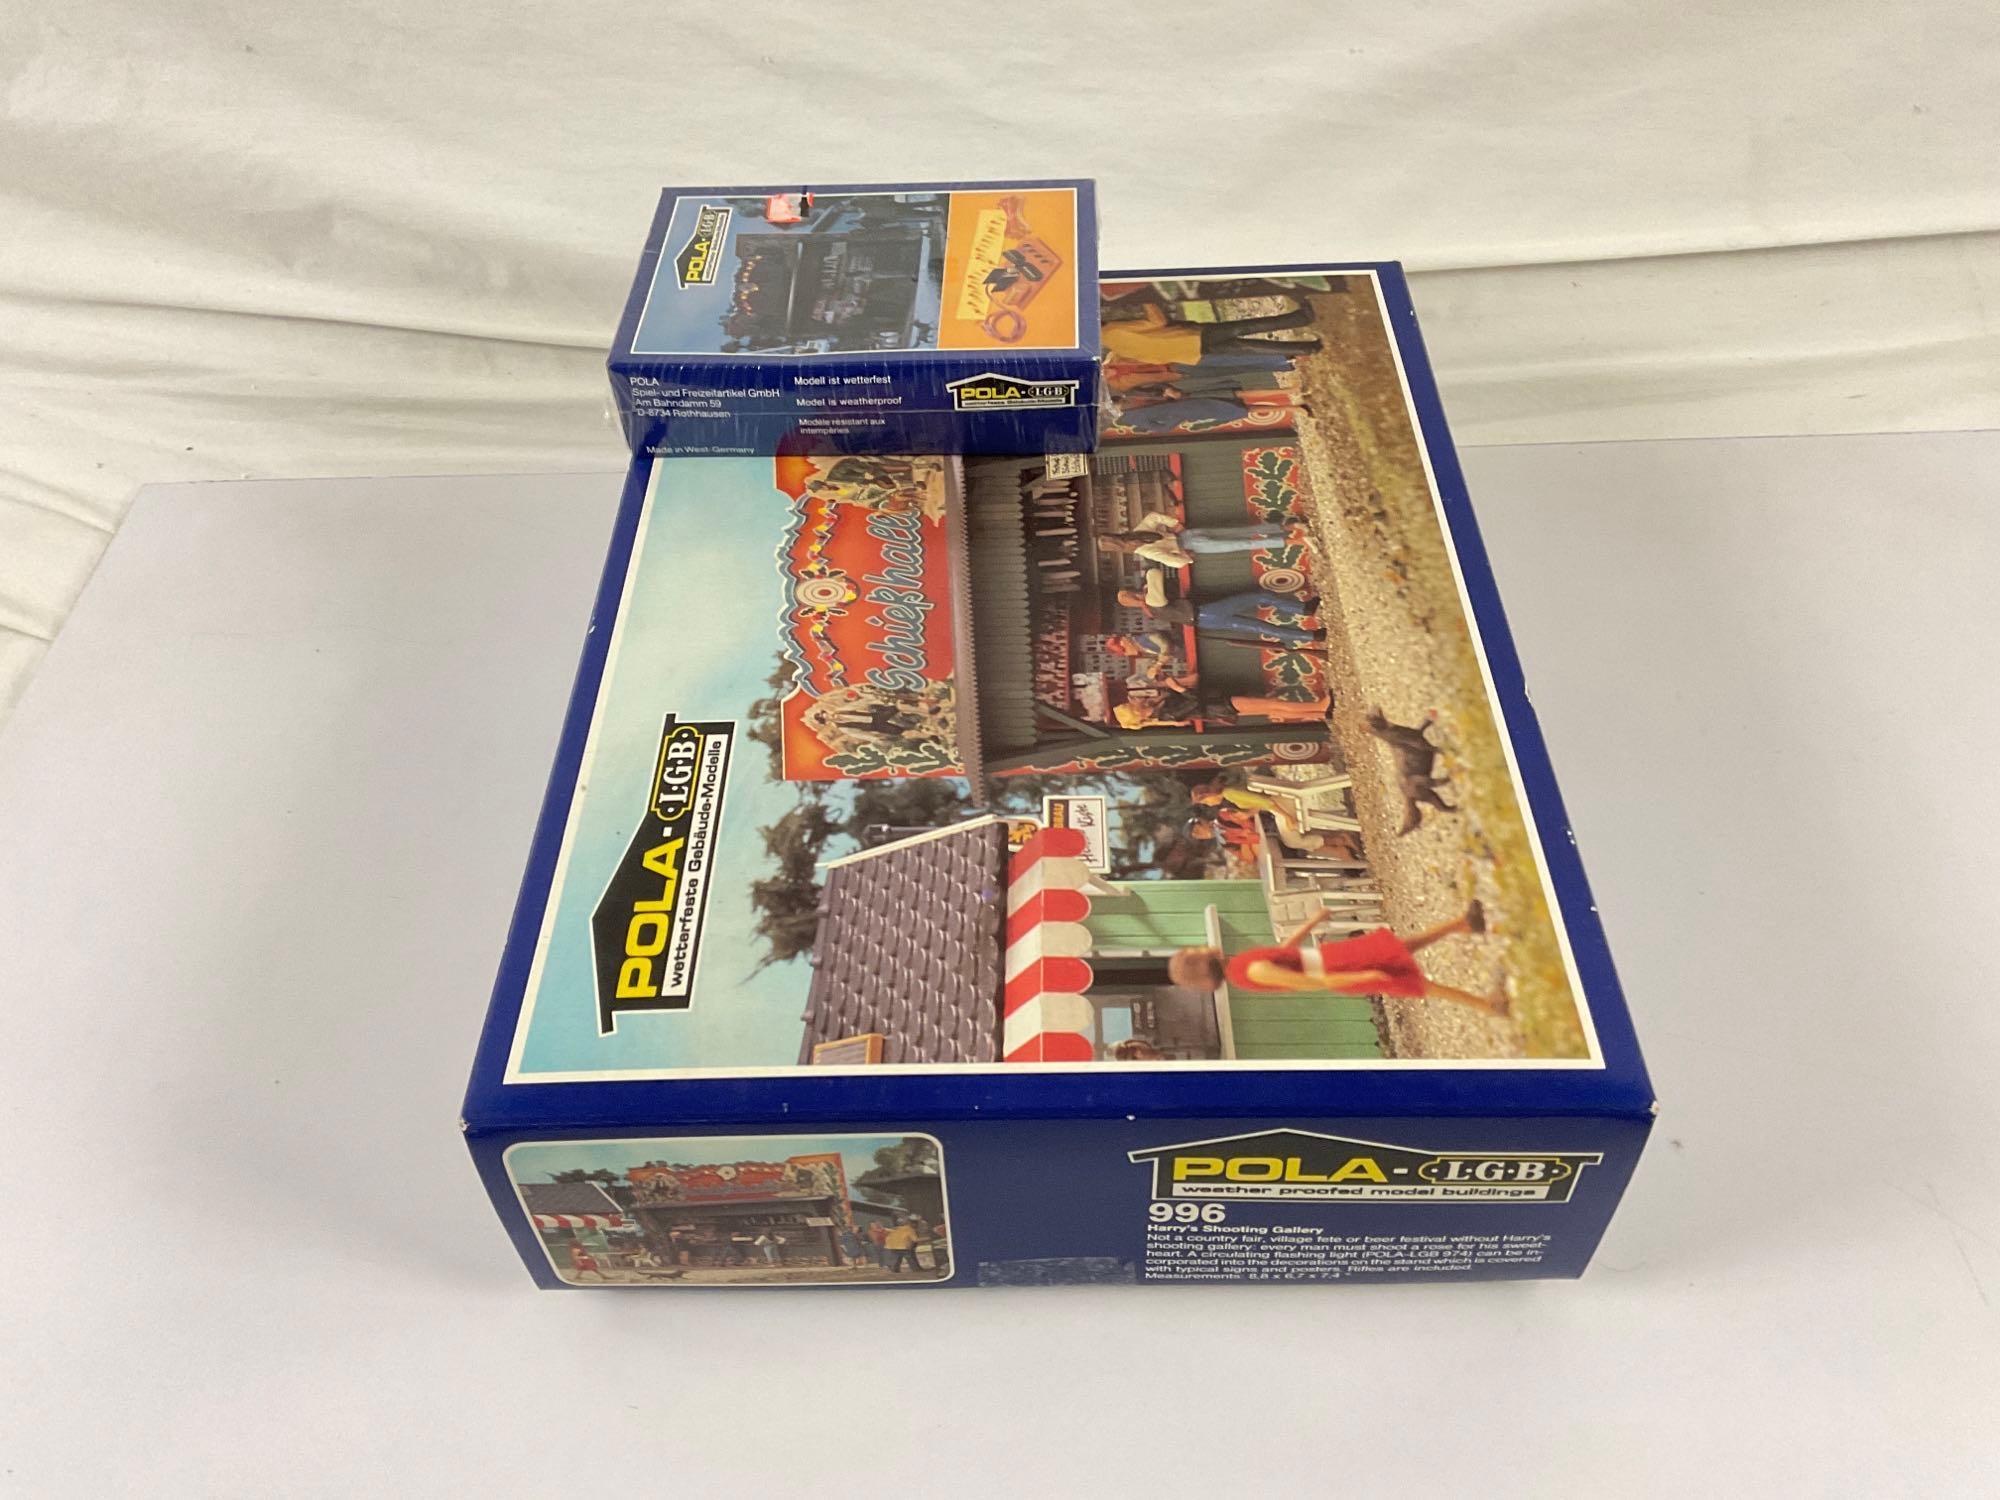 Pola P996 Harry's Shooting Gallery Model Kit and P974 light kit for shooting gallery